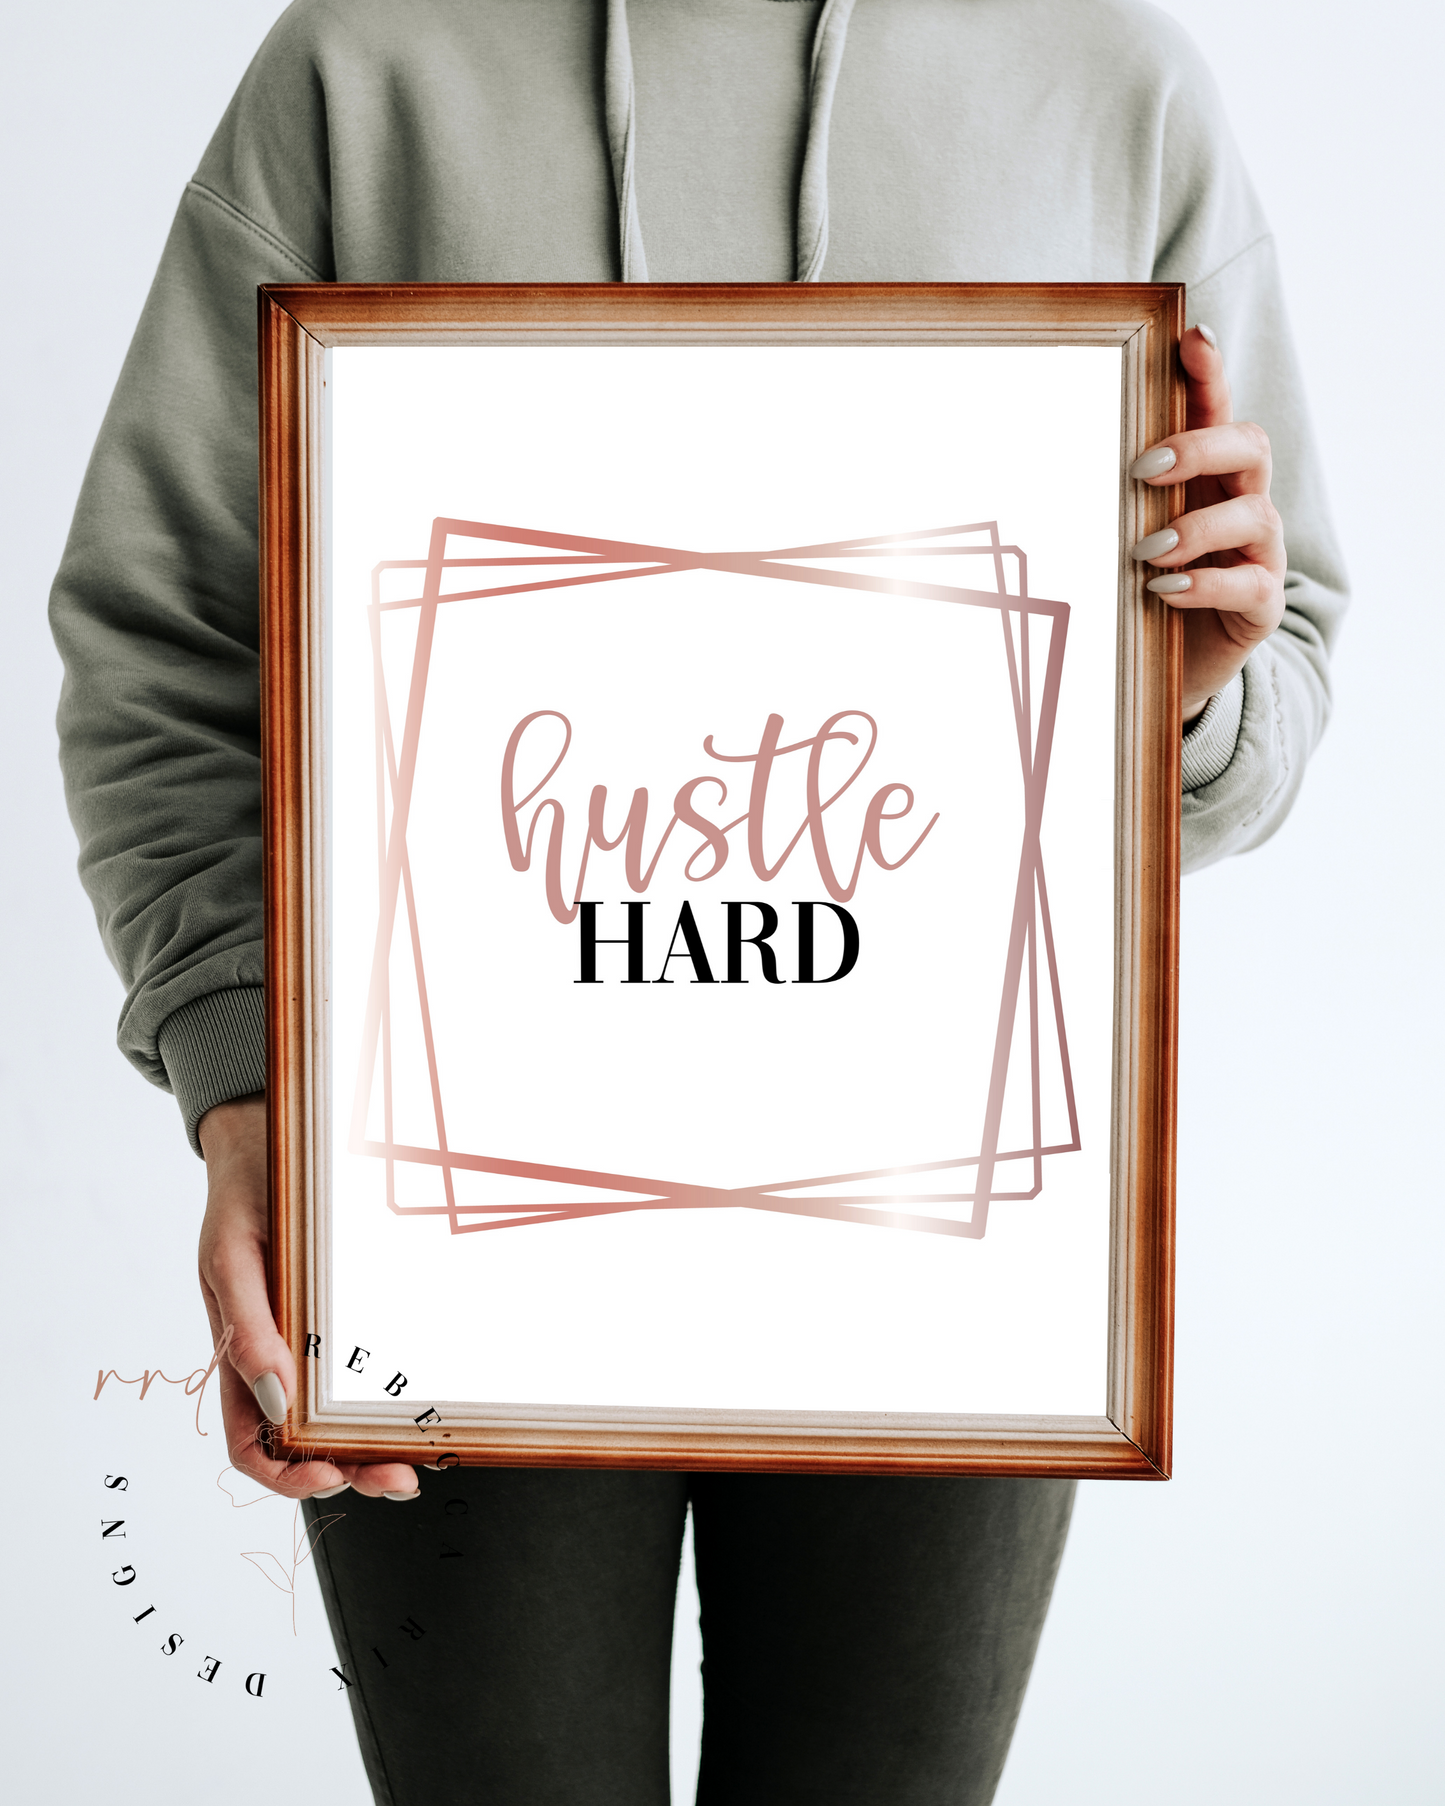 "Hustle Hard" Girl Boss Quote In Rose Gold And Black, Printable Art